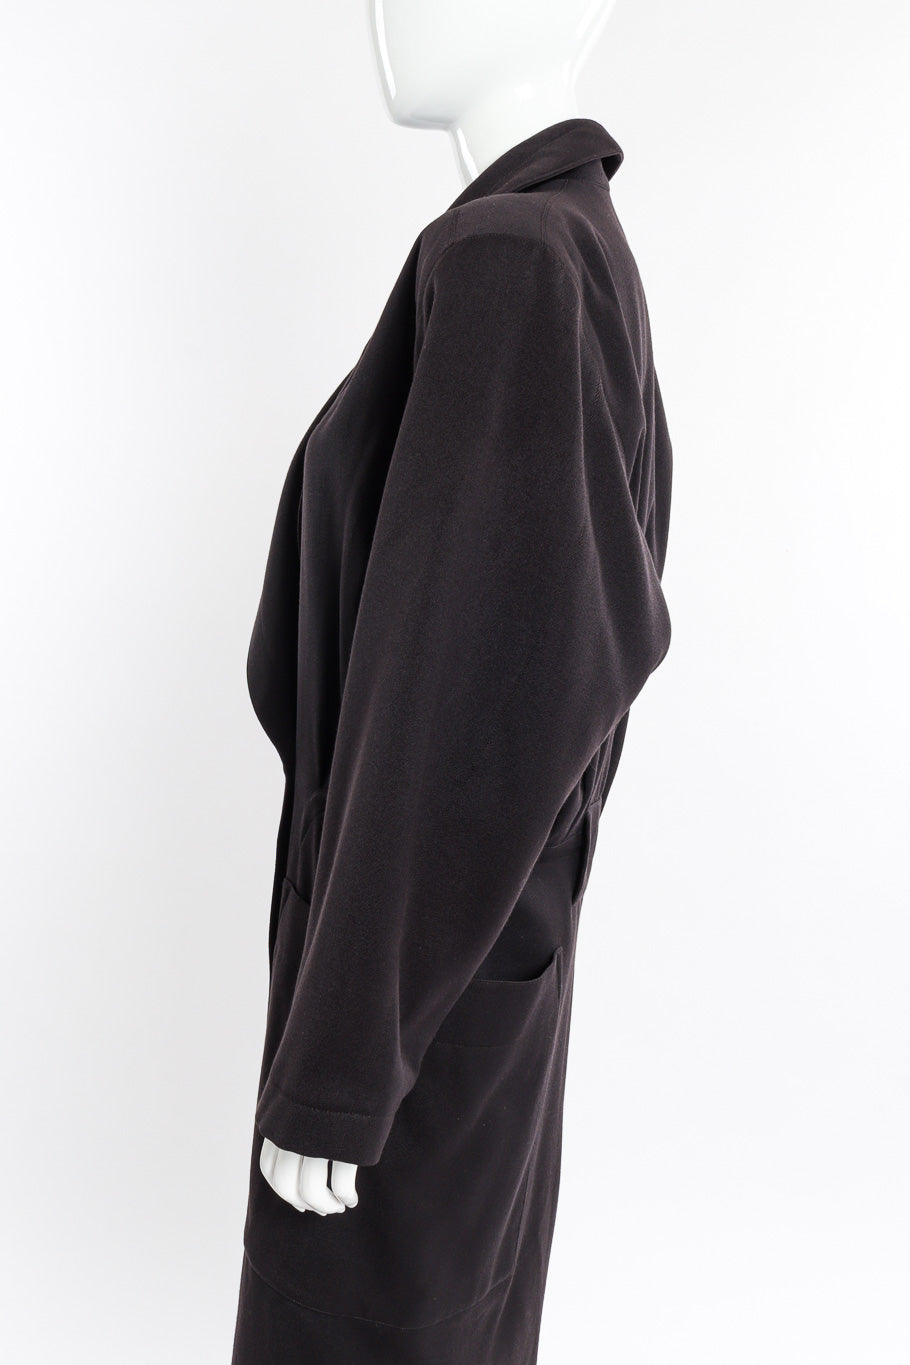 Vintage Alaia Oversized Double Breasted Wool Coat side view on mannequin closeup @recessla